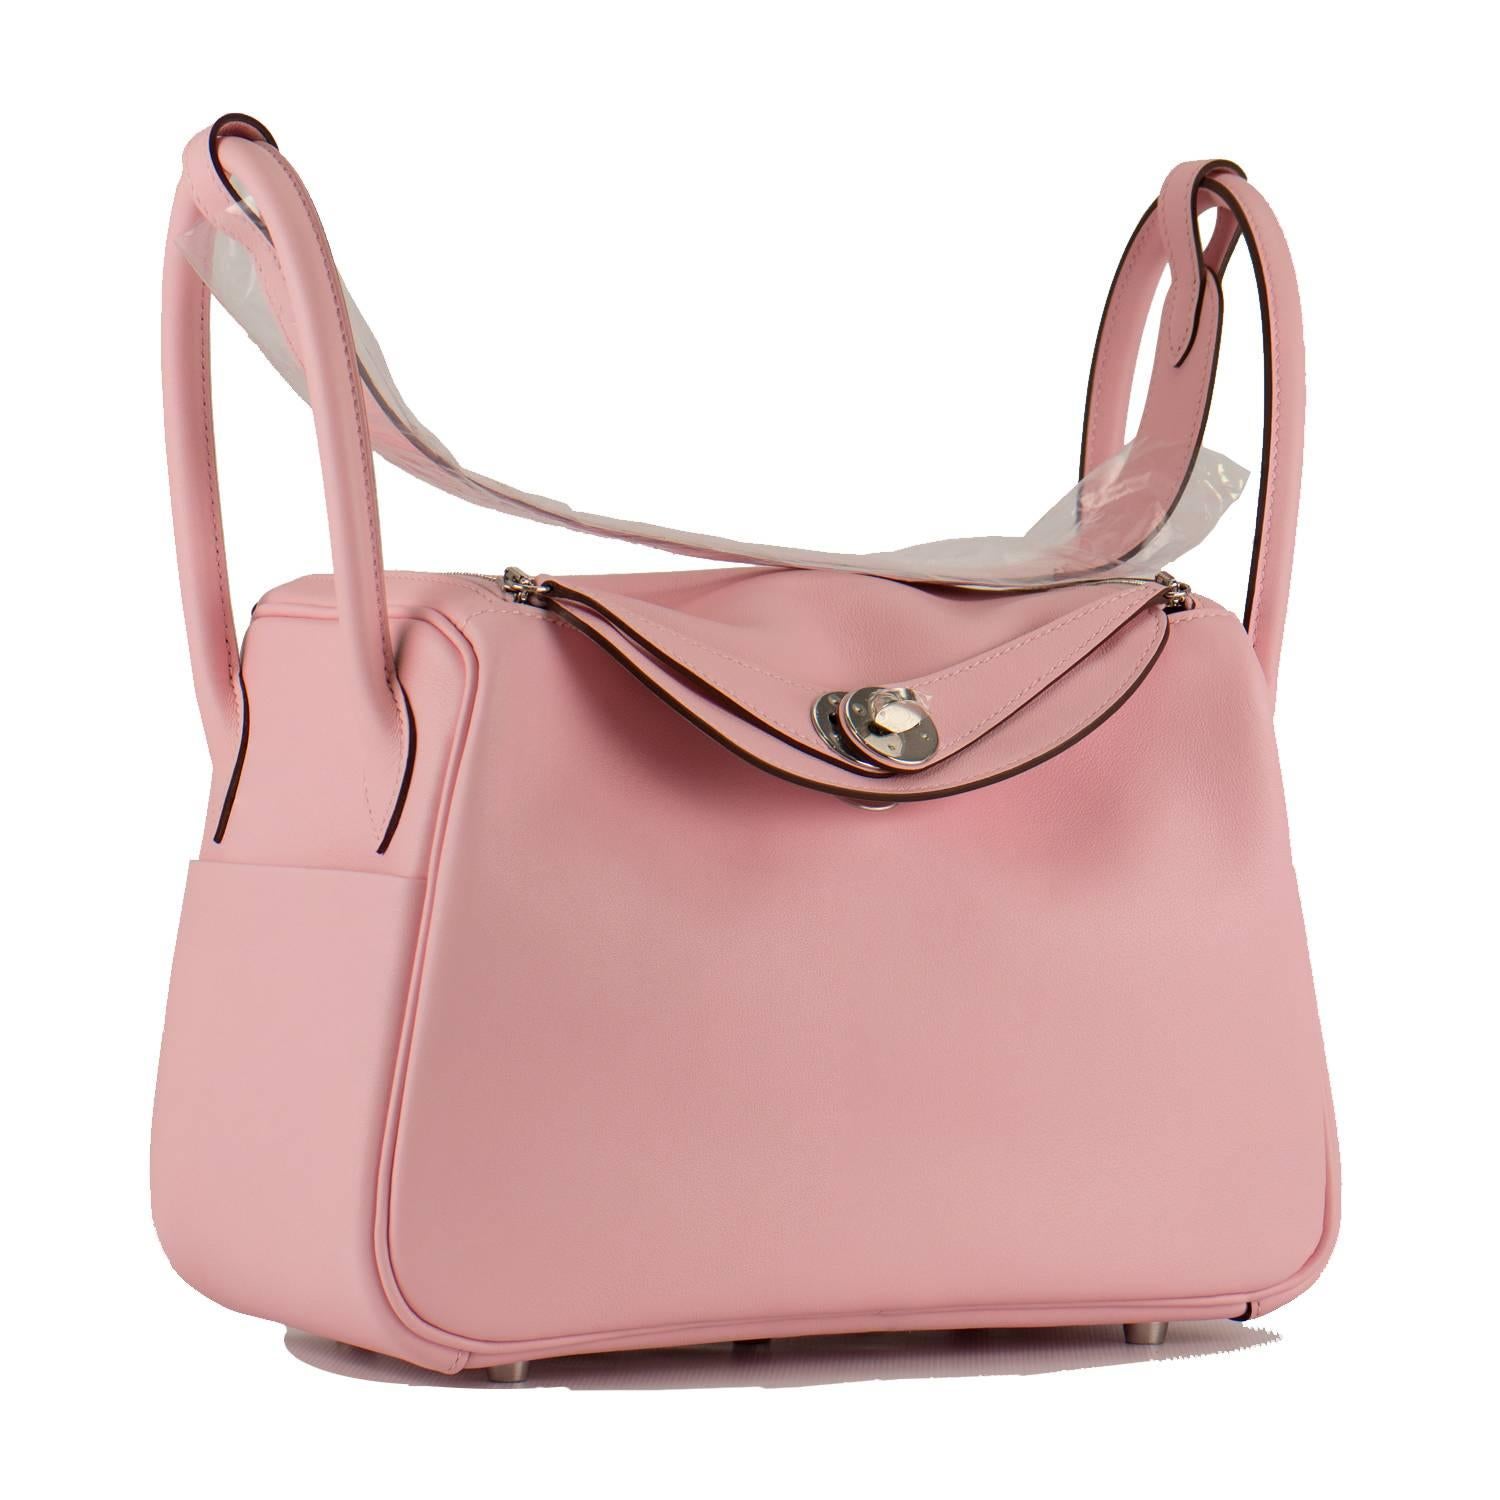 Hermes Handbag Lindy 26 Veau Swift Leather 3Q Rose Sakura Palladium Hardware 2016.

Pre-owned and never used.

Bought it in Hermes store in 2016.

Model: Lindy

Stamp; X

Color: 3Q Rose Sakura.

Details:
*Protective felt removed for